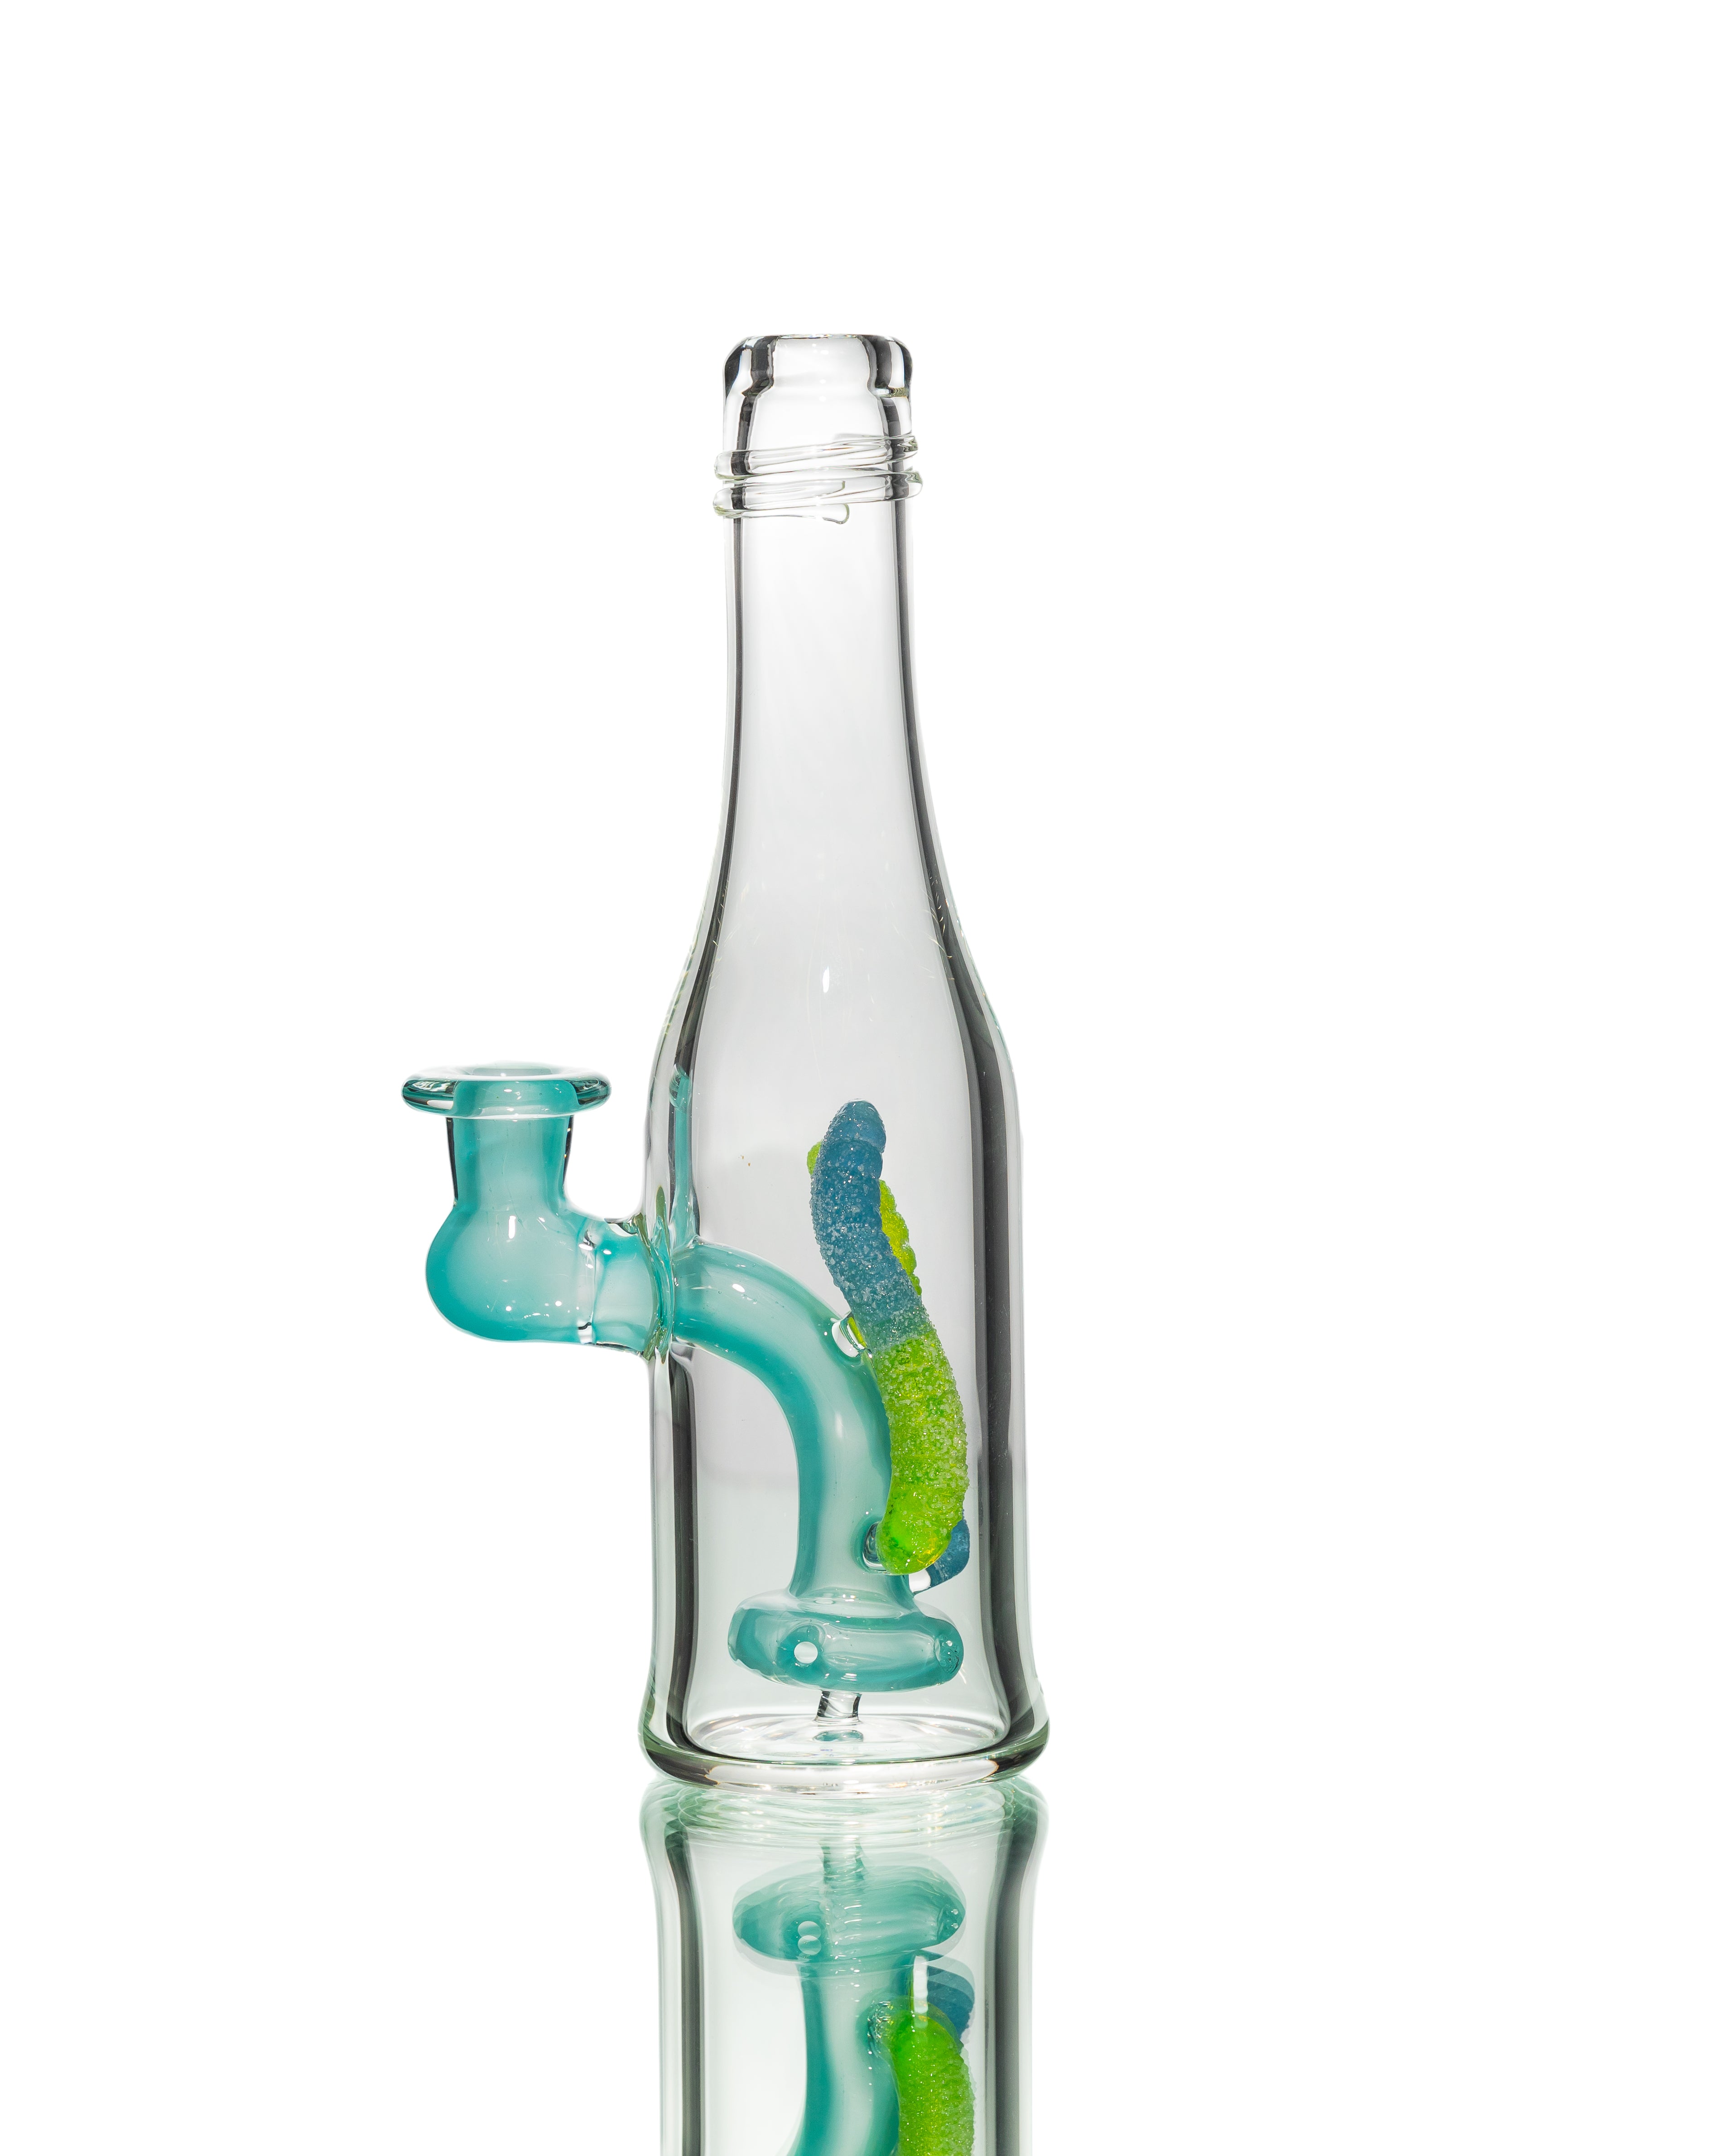 Emperial Glass - Really Teally/Green Slyme Sour Worm Bottle Rig